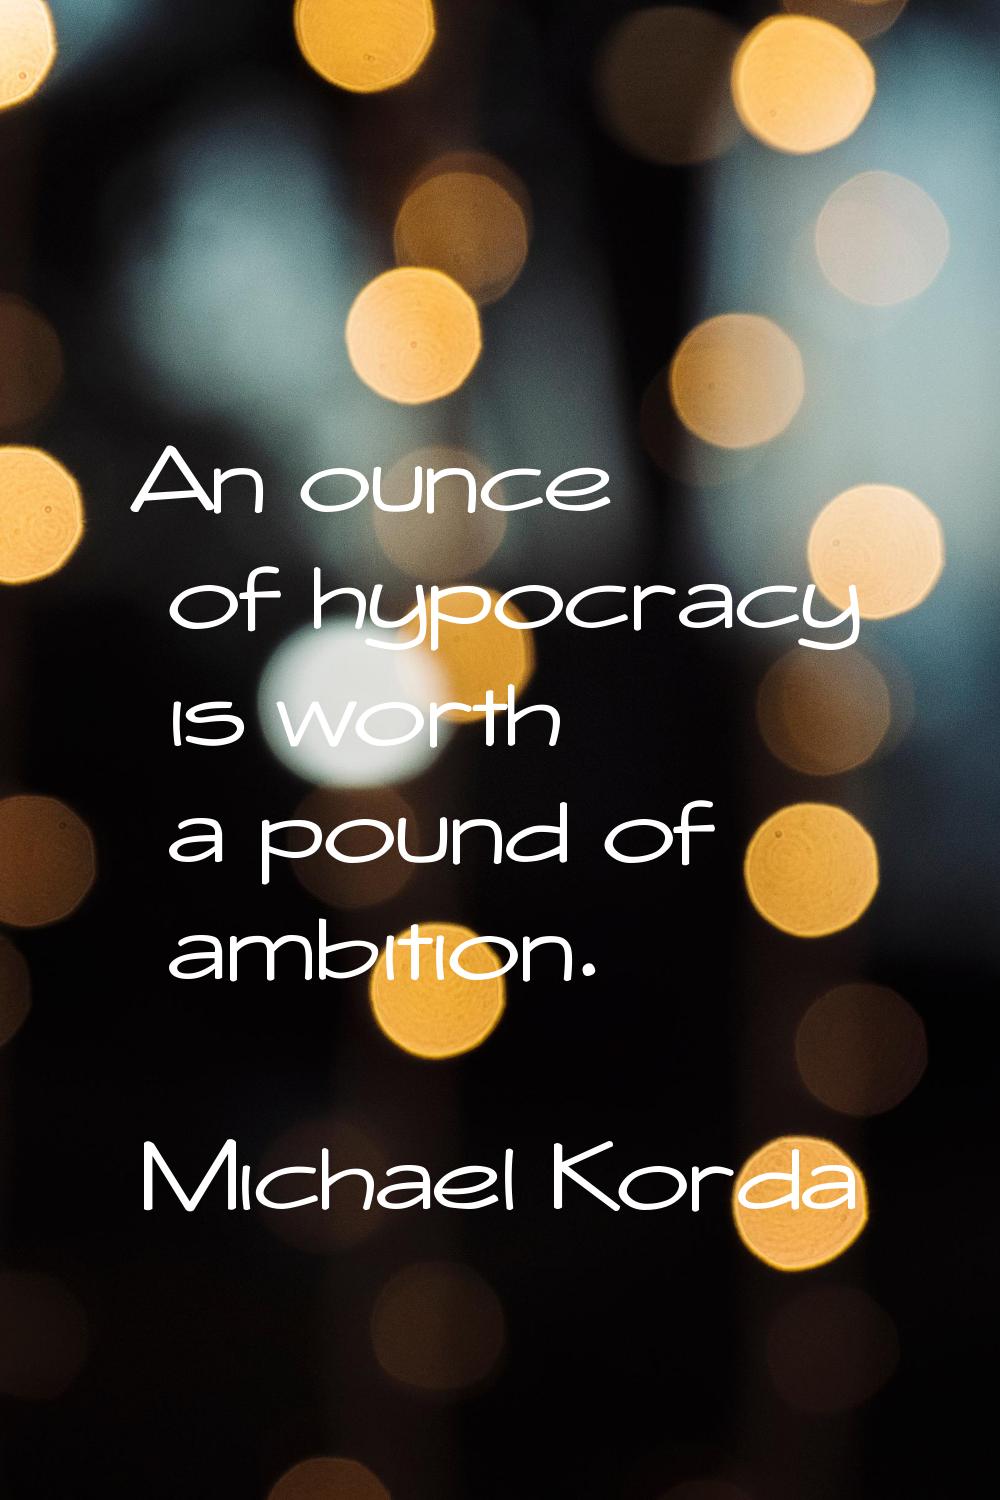 An ounce of hypocracy is worth a pound of ambition.